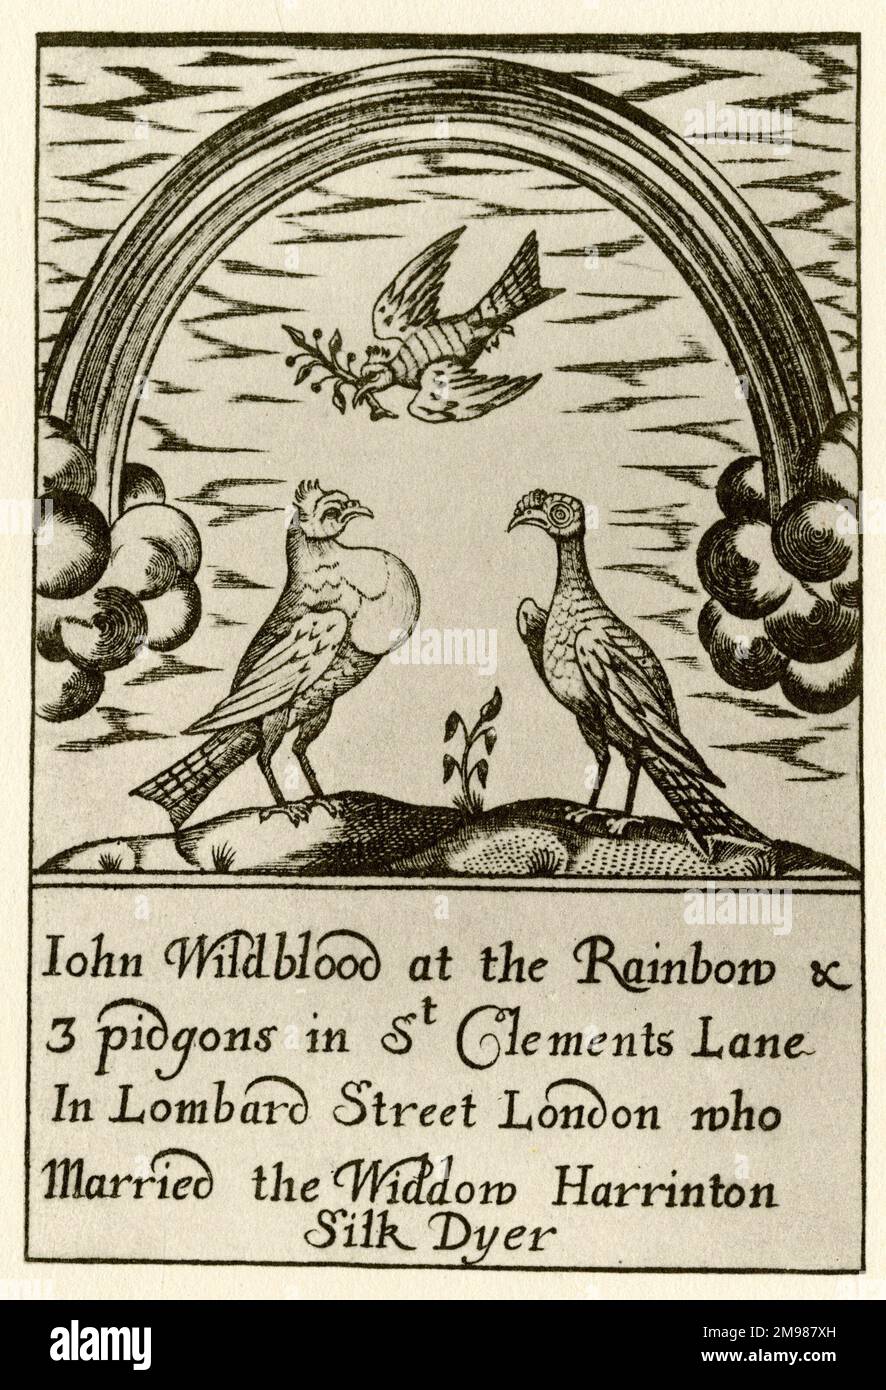 London Trade Card - John Wildblood, Silk Dyer, at the Rainbow and Three Pigeons, St Clements Lane, Lombard Street (who married the widow Harrinton). Stock Photo